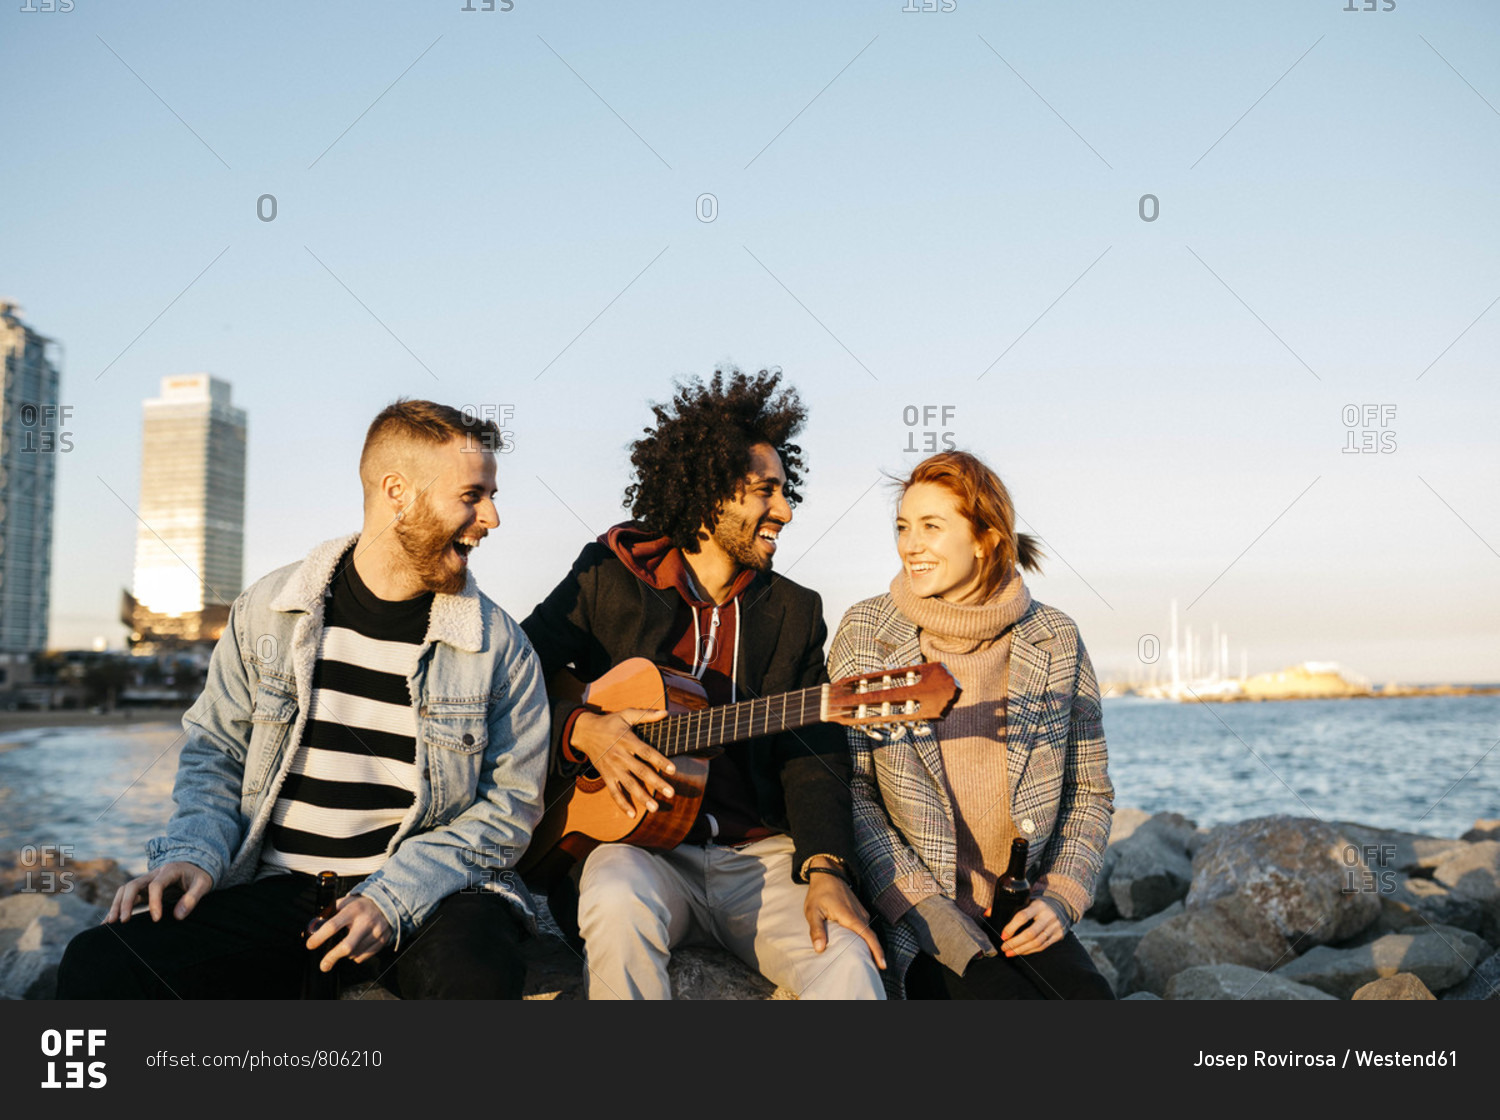 Three happy friends with guitar sitting outdoors at the coast sunset